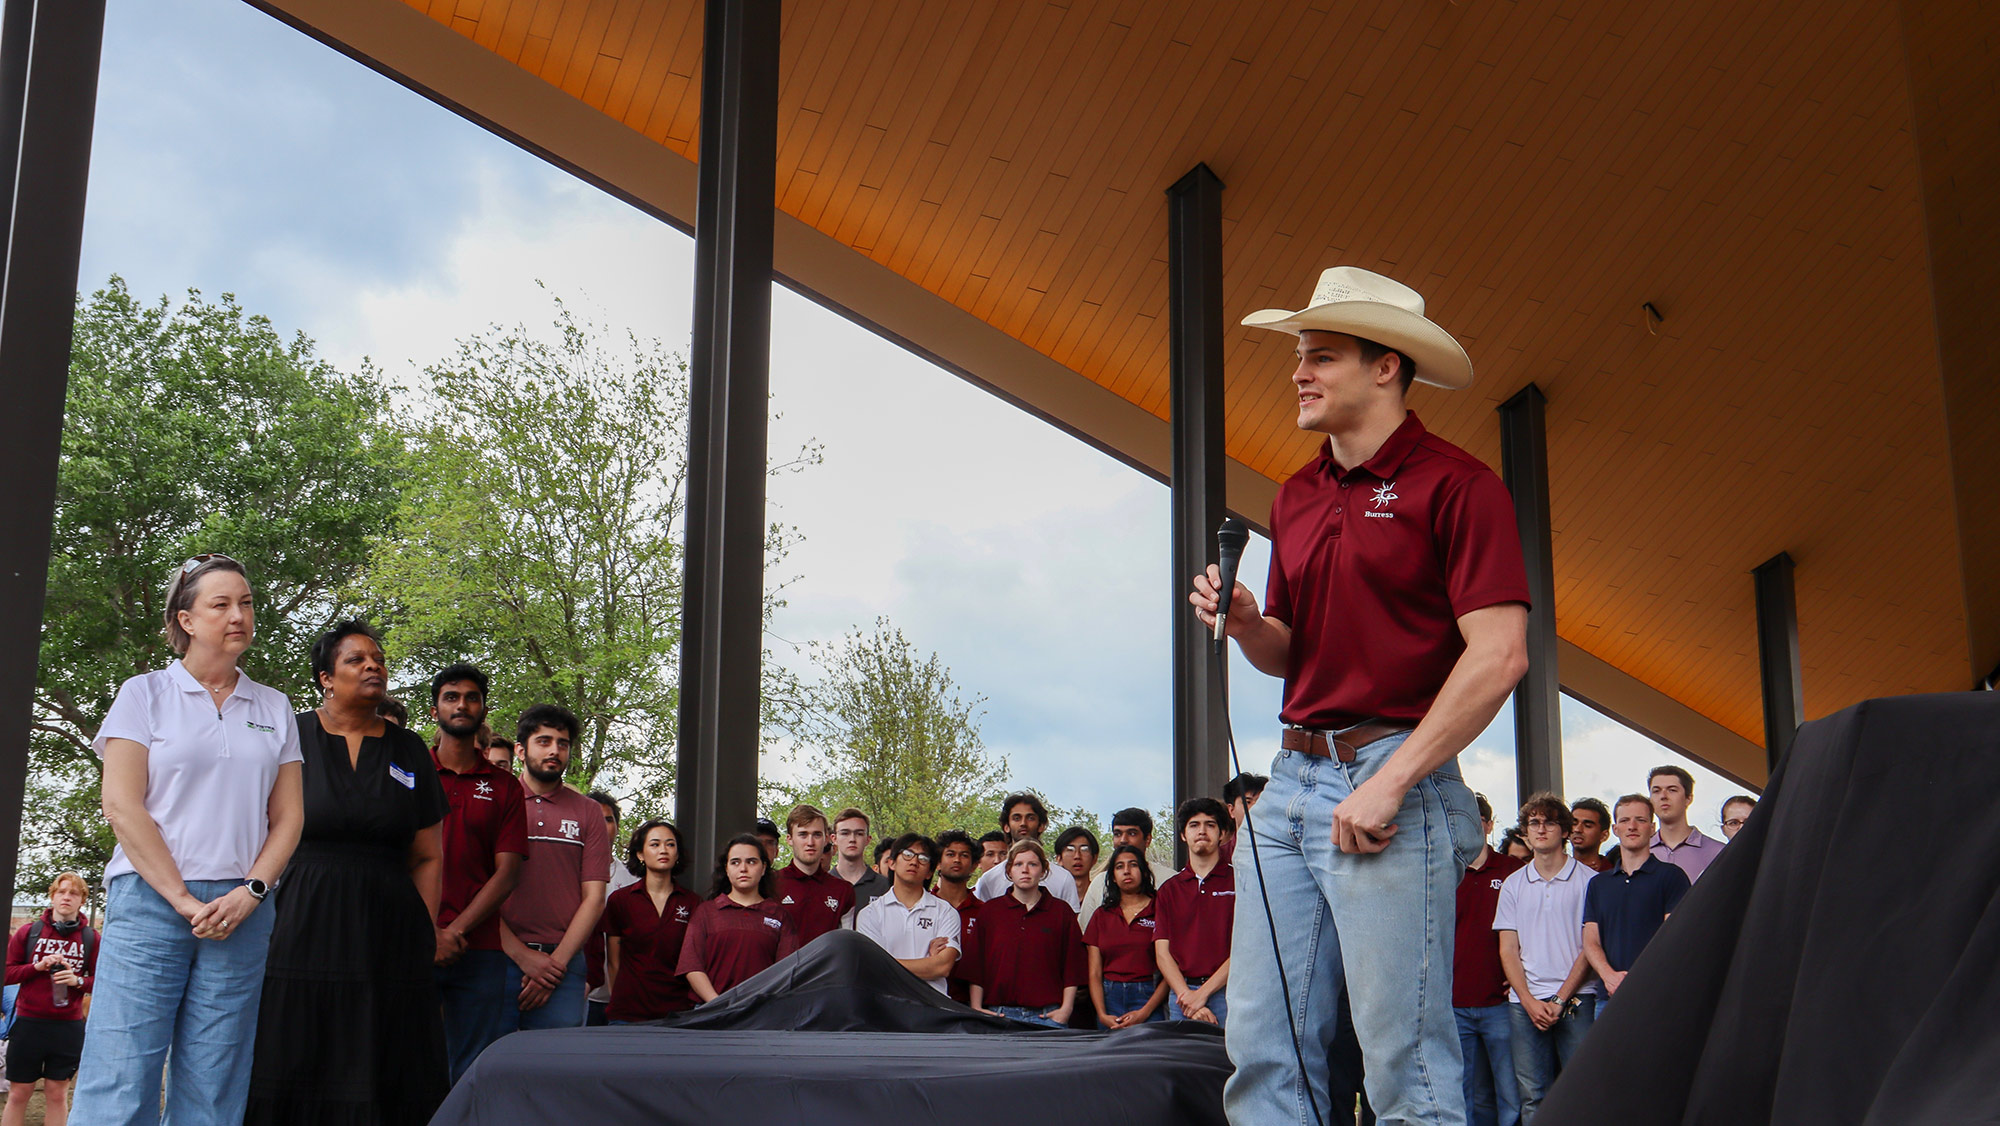 A man with a microphone addresses a group of students.